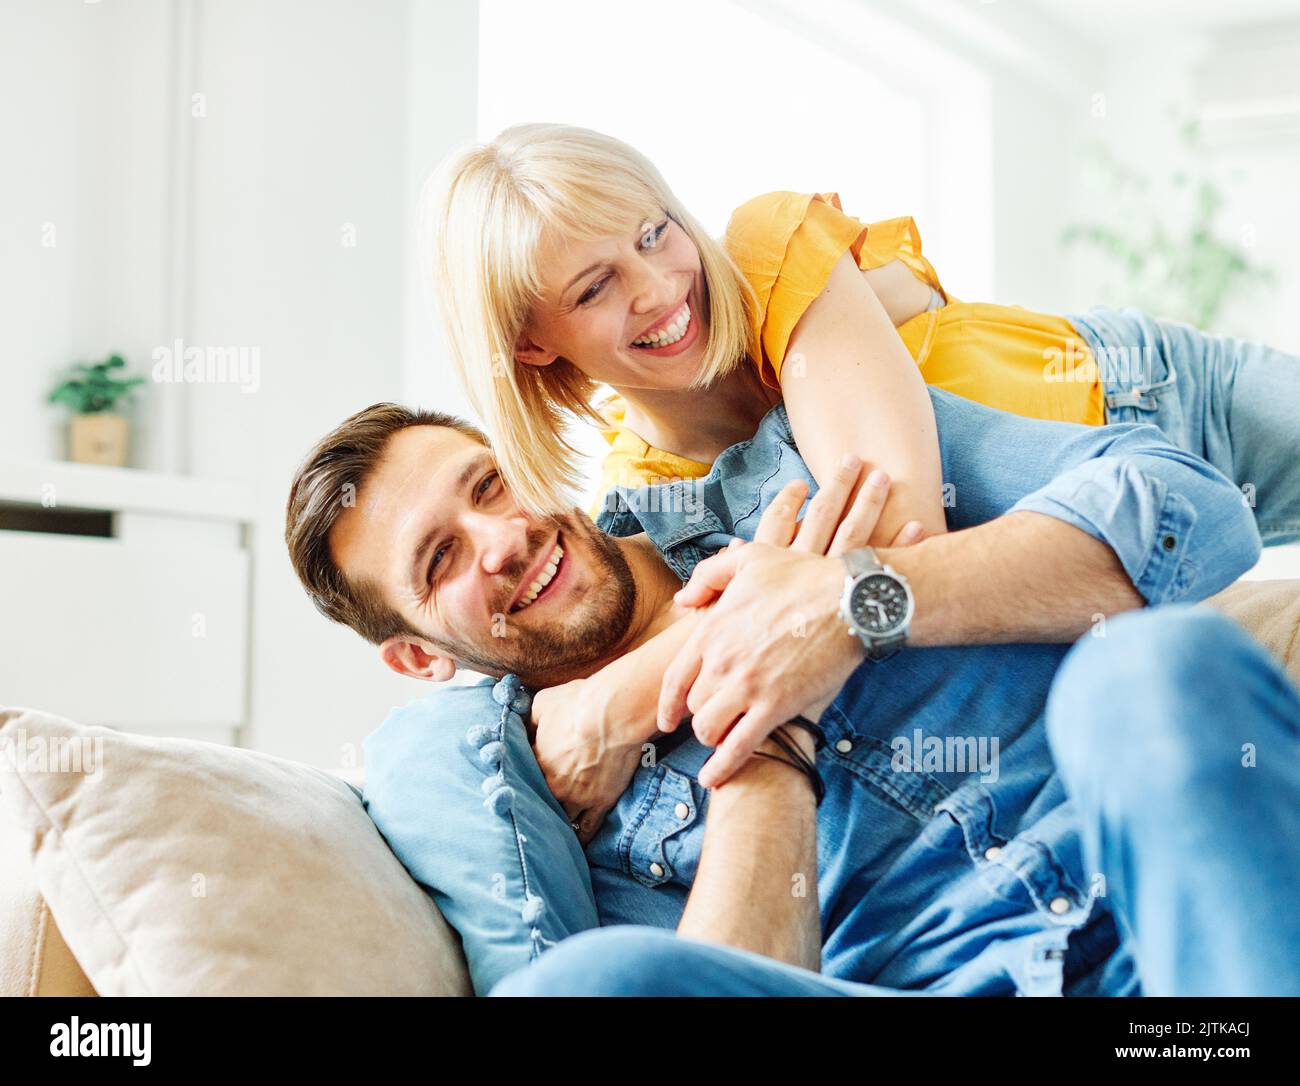 woman couple man happy happiness love young lifestyle together romantic boyfriend girlfriend romance boyfriend girlfriend home fun Stock Photo